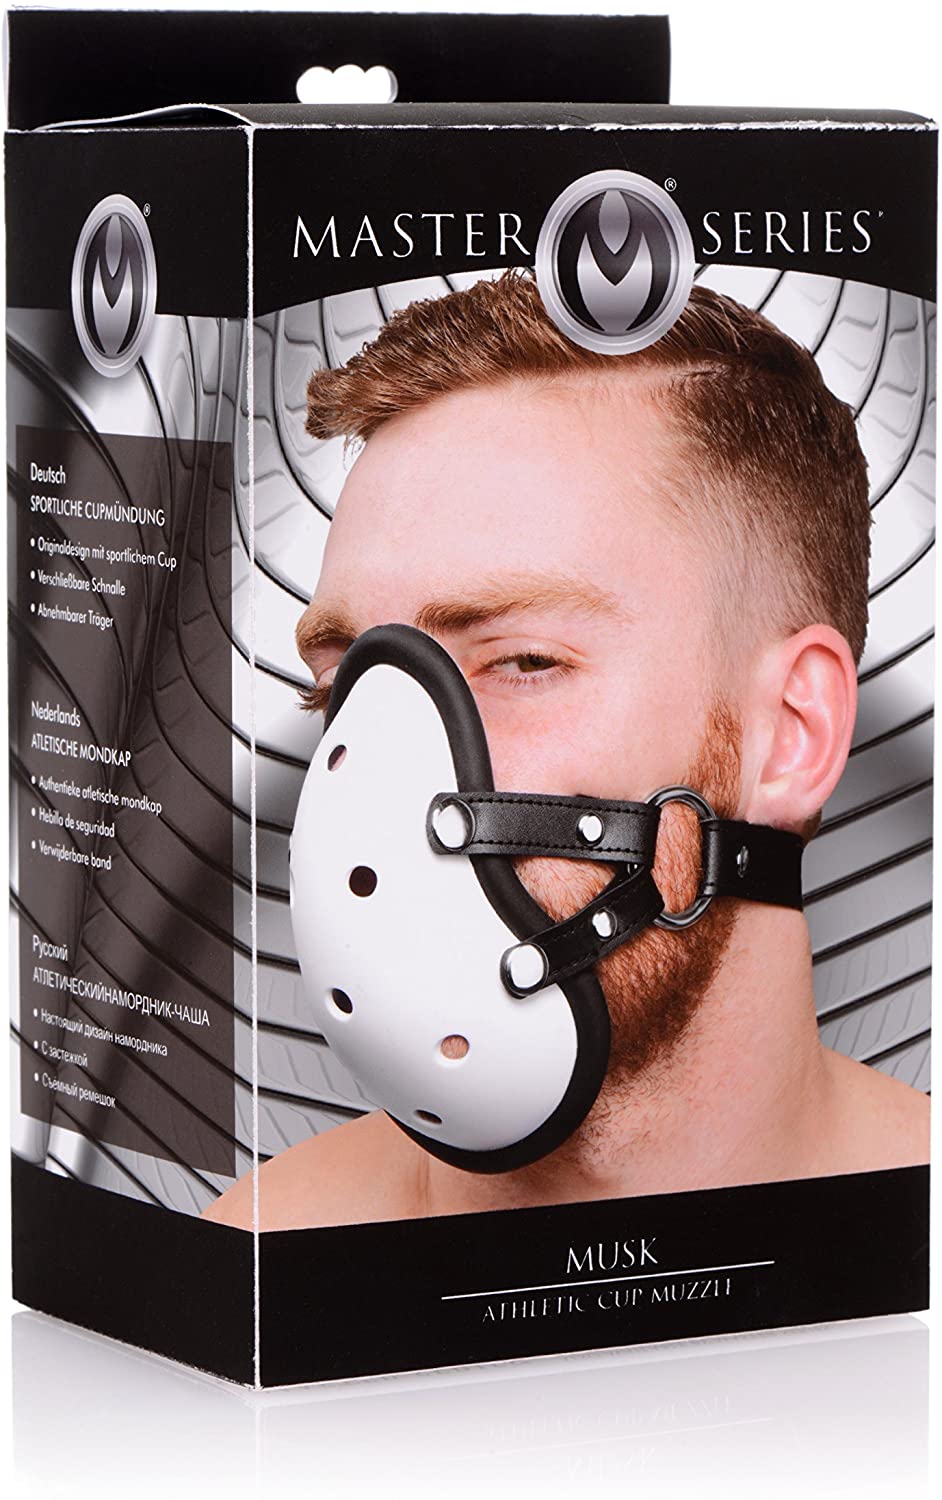 Musk Athletic Cup Muzzle (6937682116772)